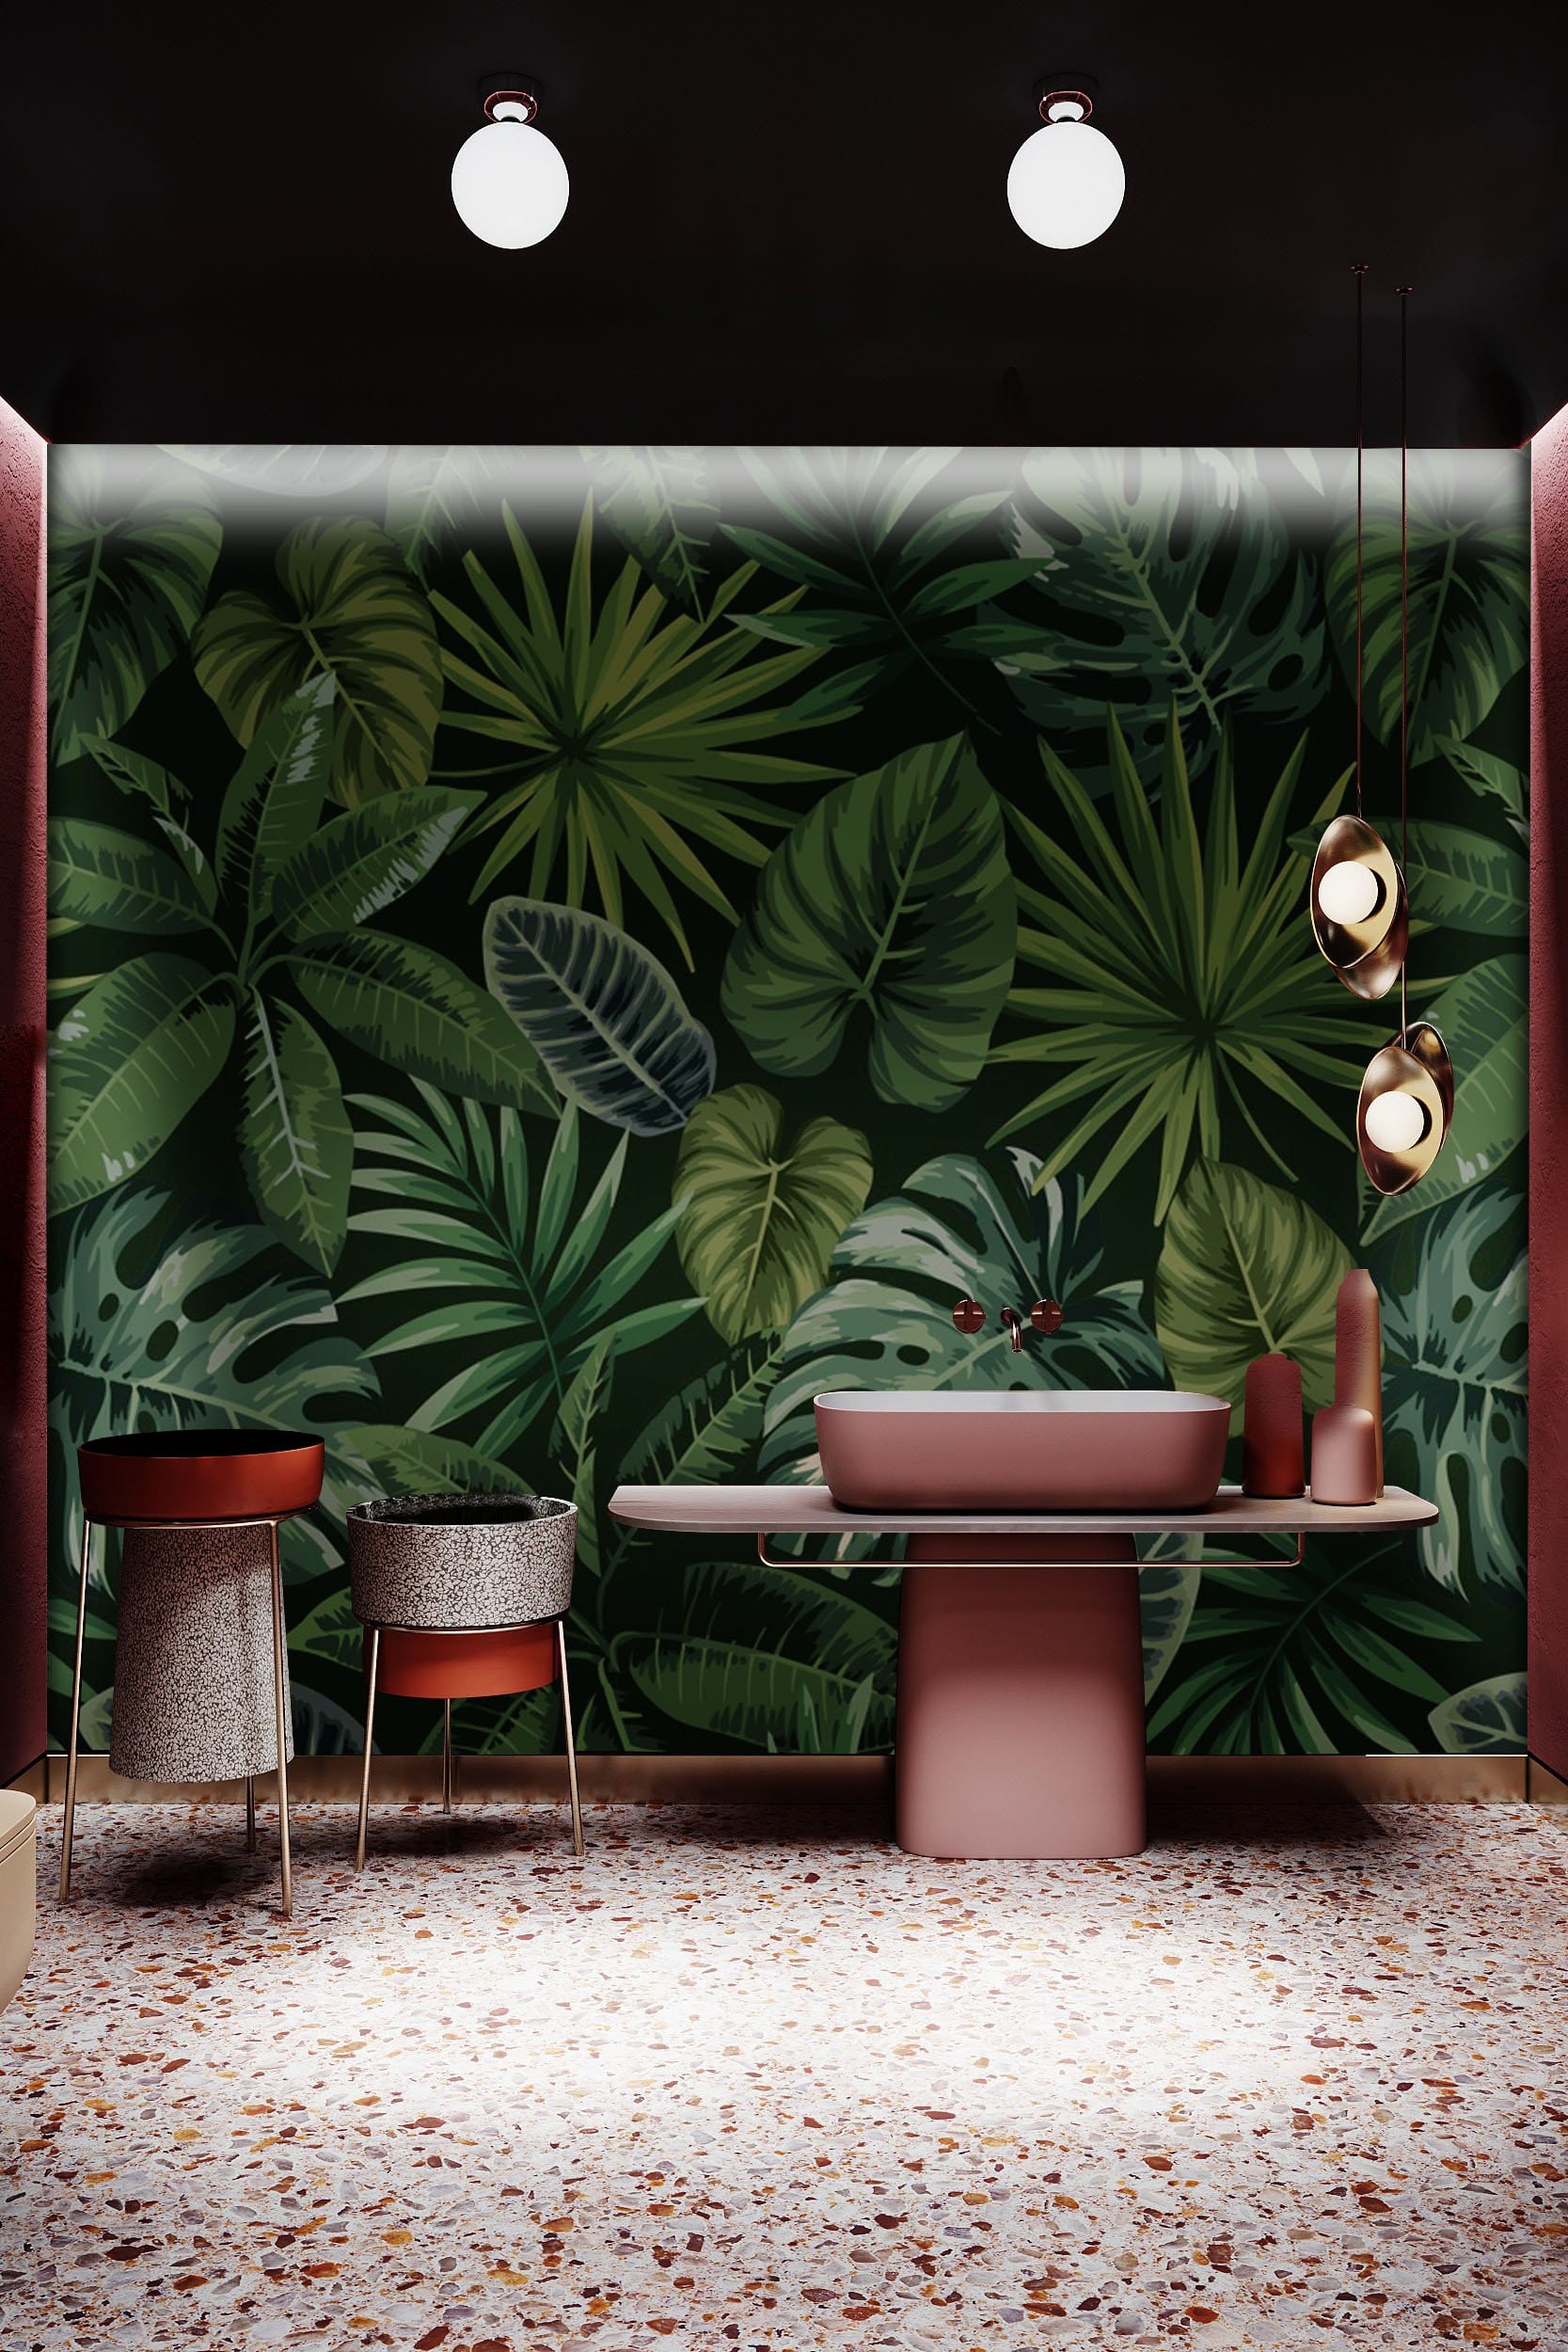 A Home Decoration Comprising of a Bathroom Wall Mural Featuring Tropical Leaves on Wallpaper